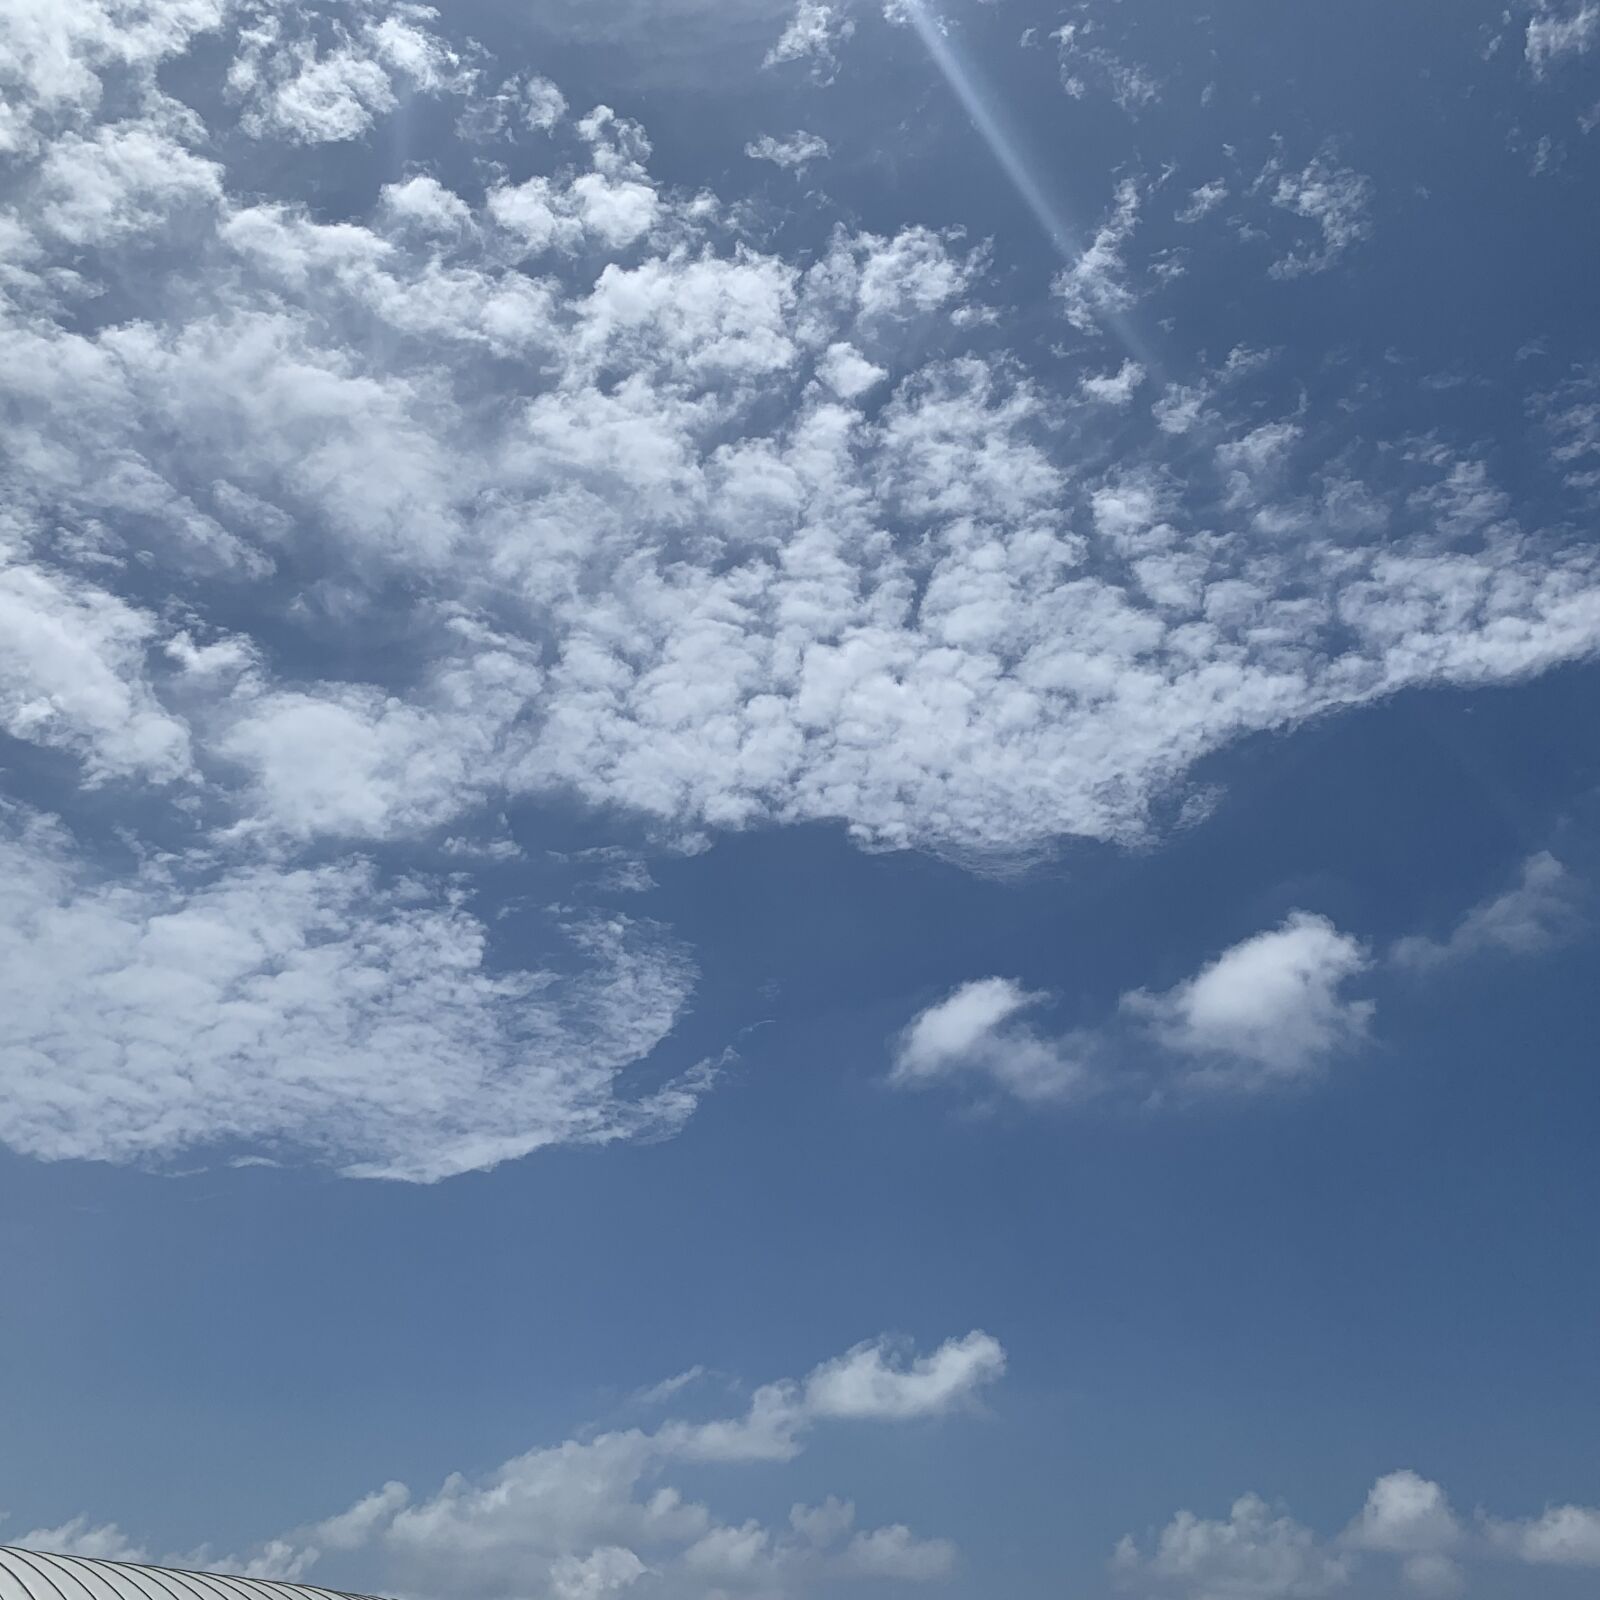 Apple iPhone XR sample photo. Sky, blue, nature photography